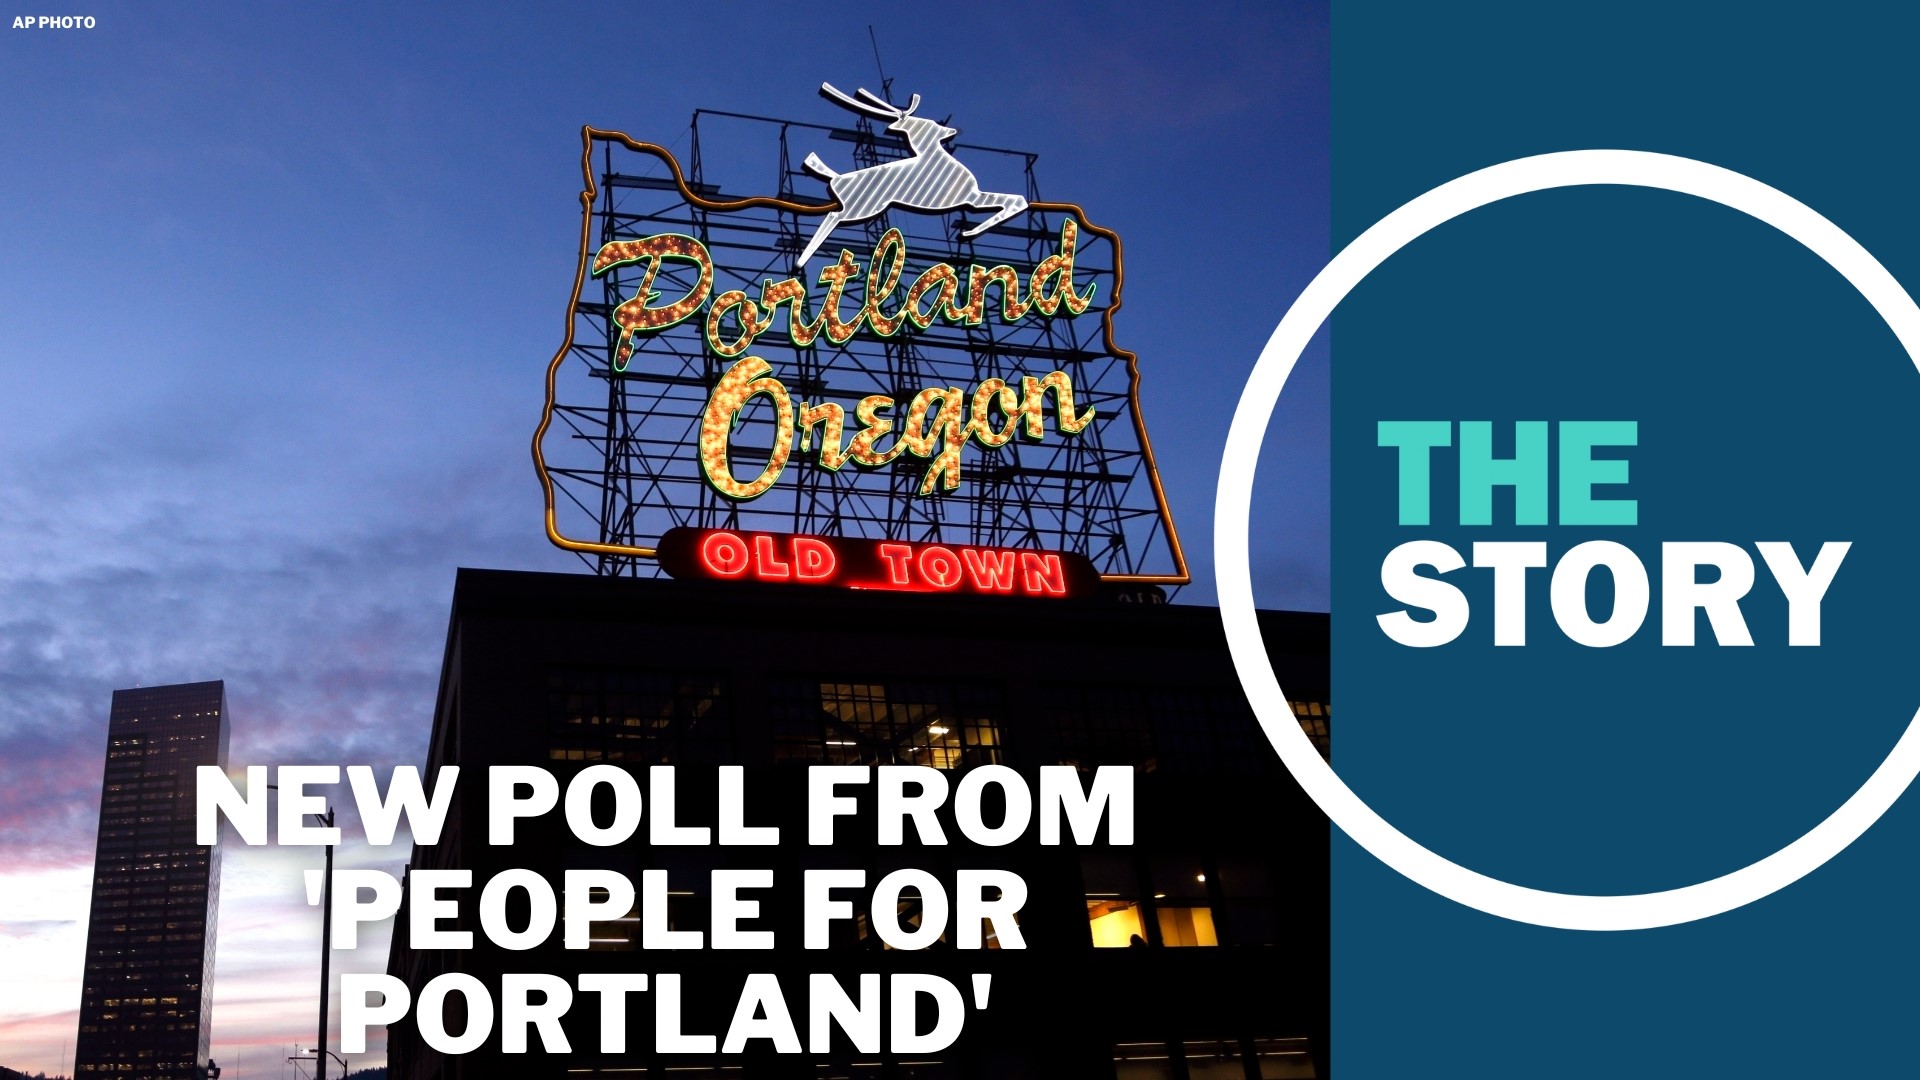 The poll commissioned by advocacy group People for Portland found 75% of respondents agreed that homelessness in Portland is an "out-of-control disaster."